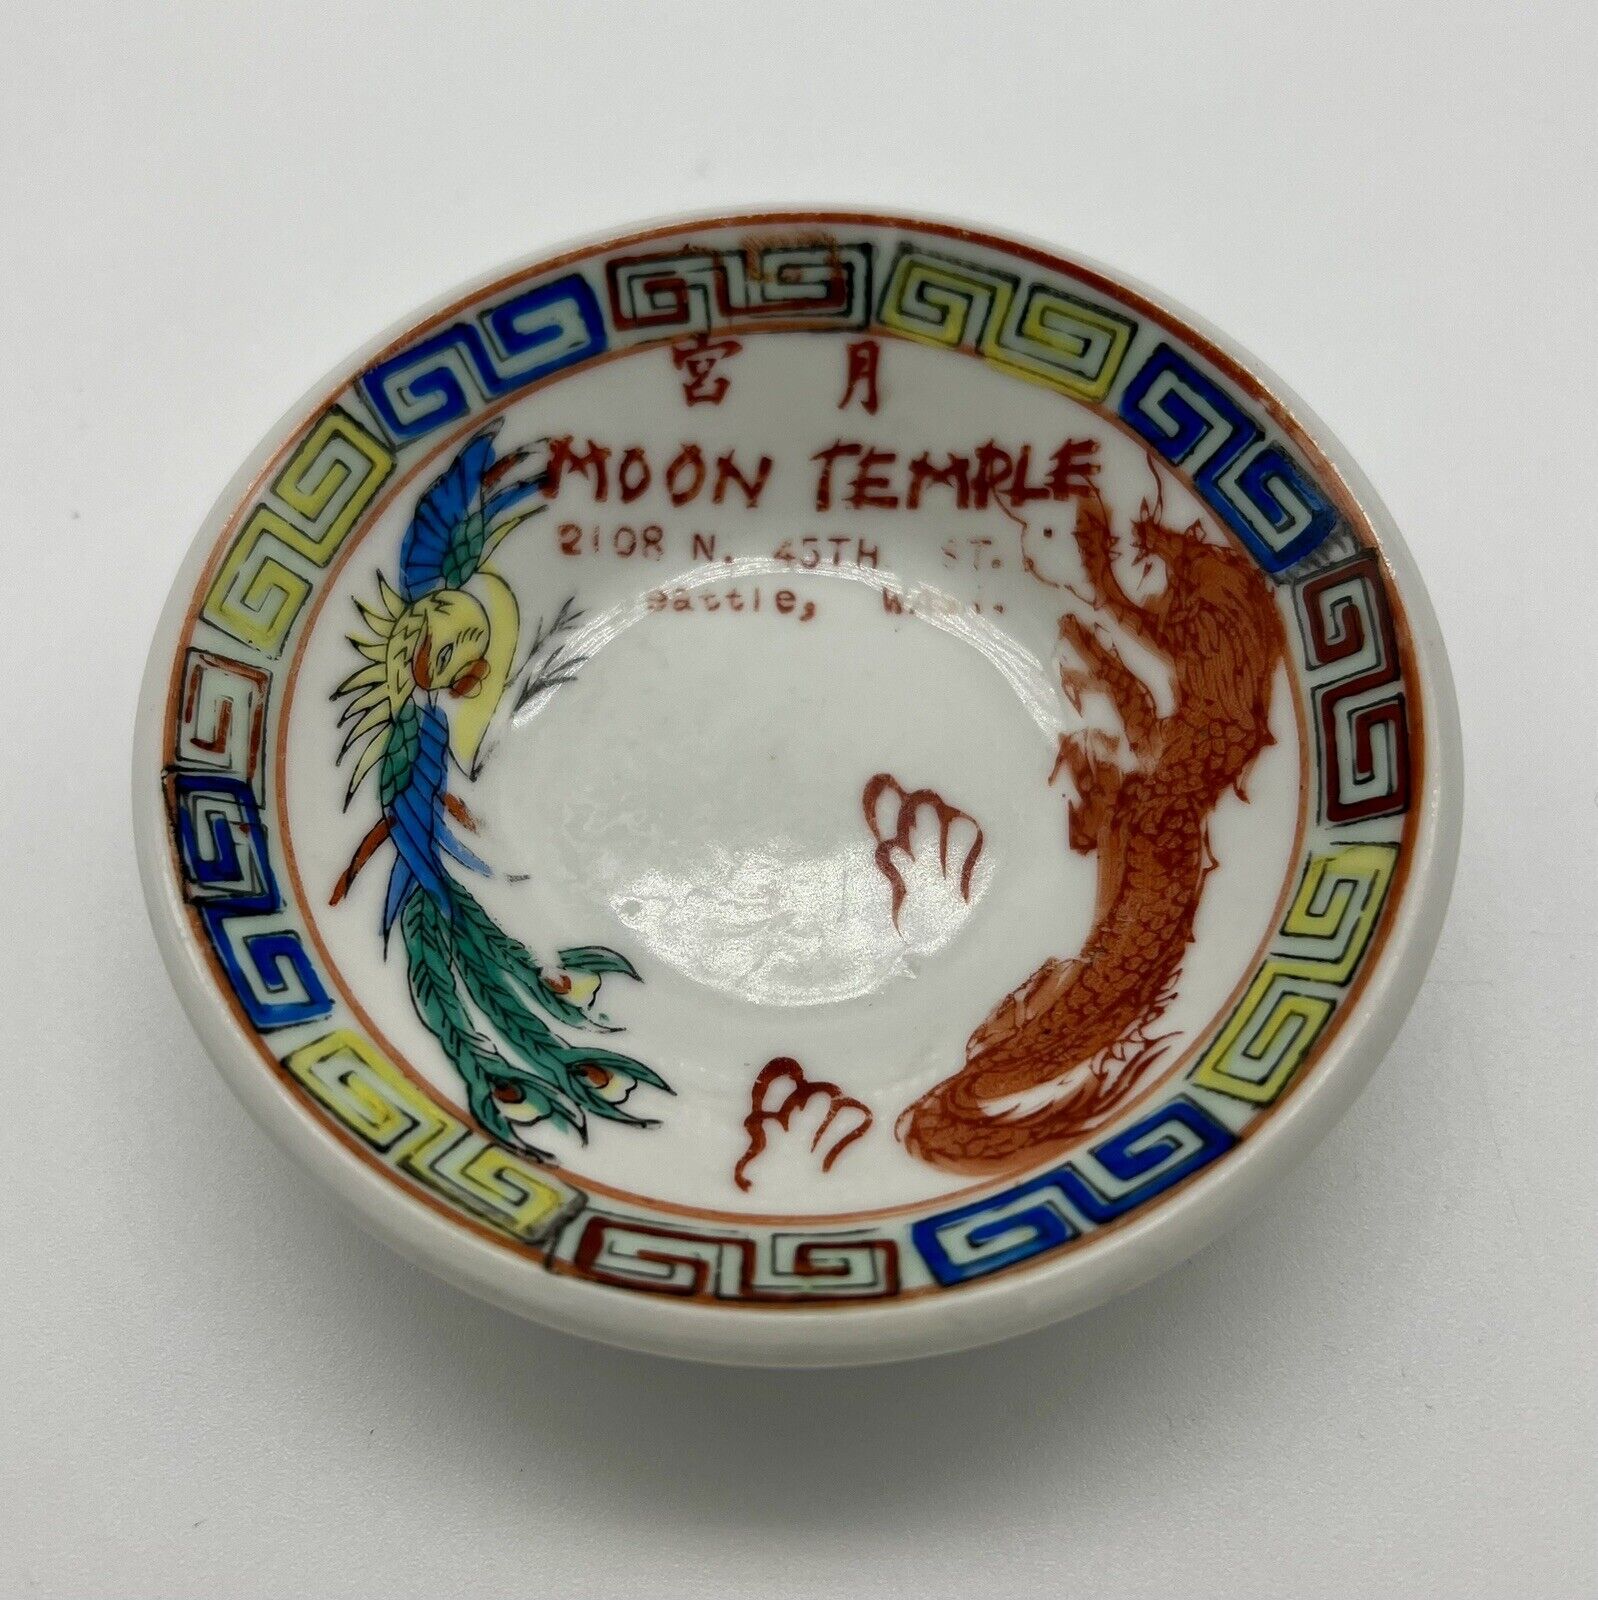 '50s SEATTLE moon temple chinese restaurant sauce bowl dragon